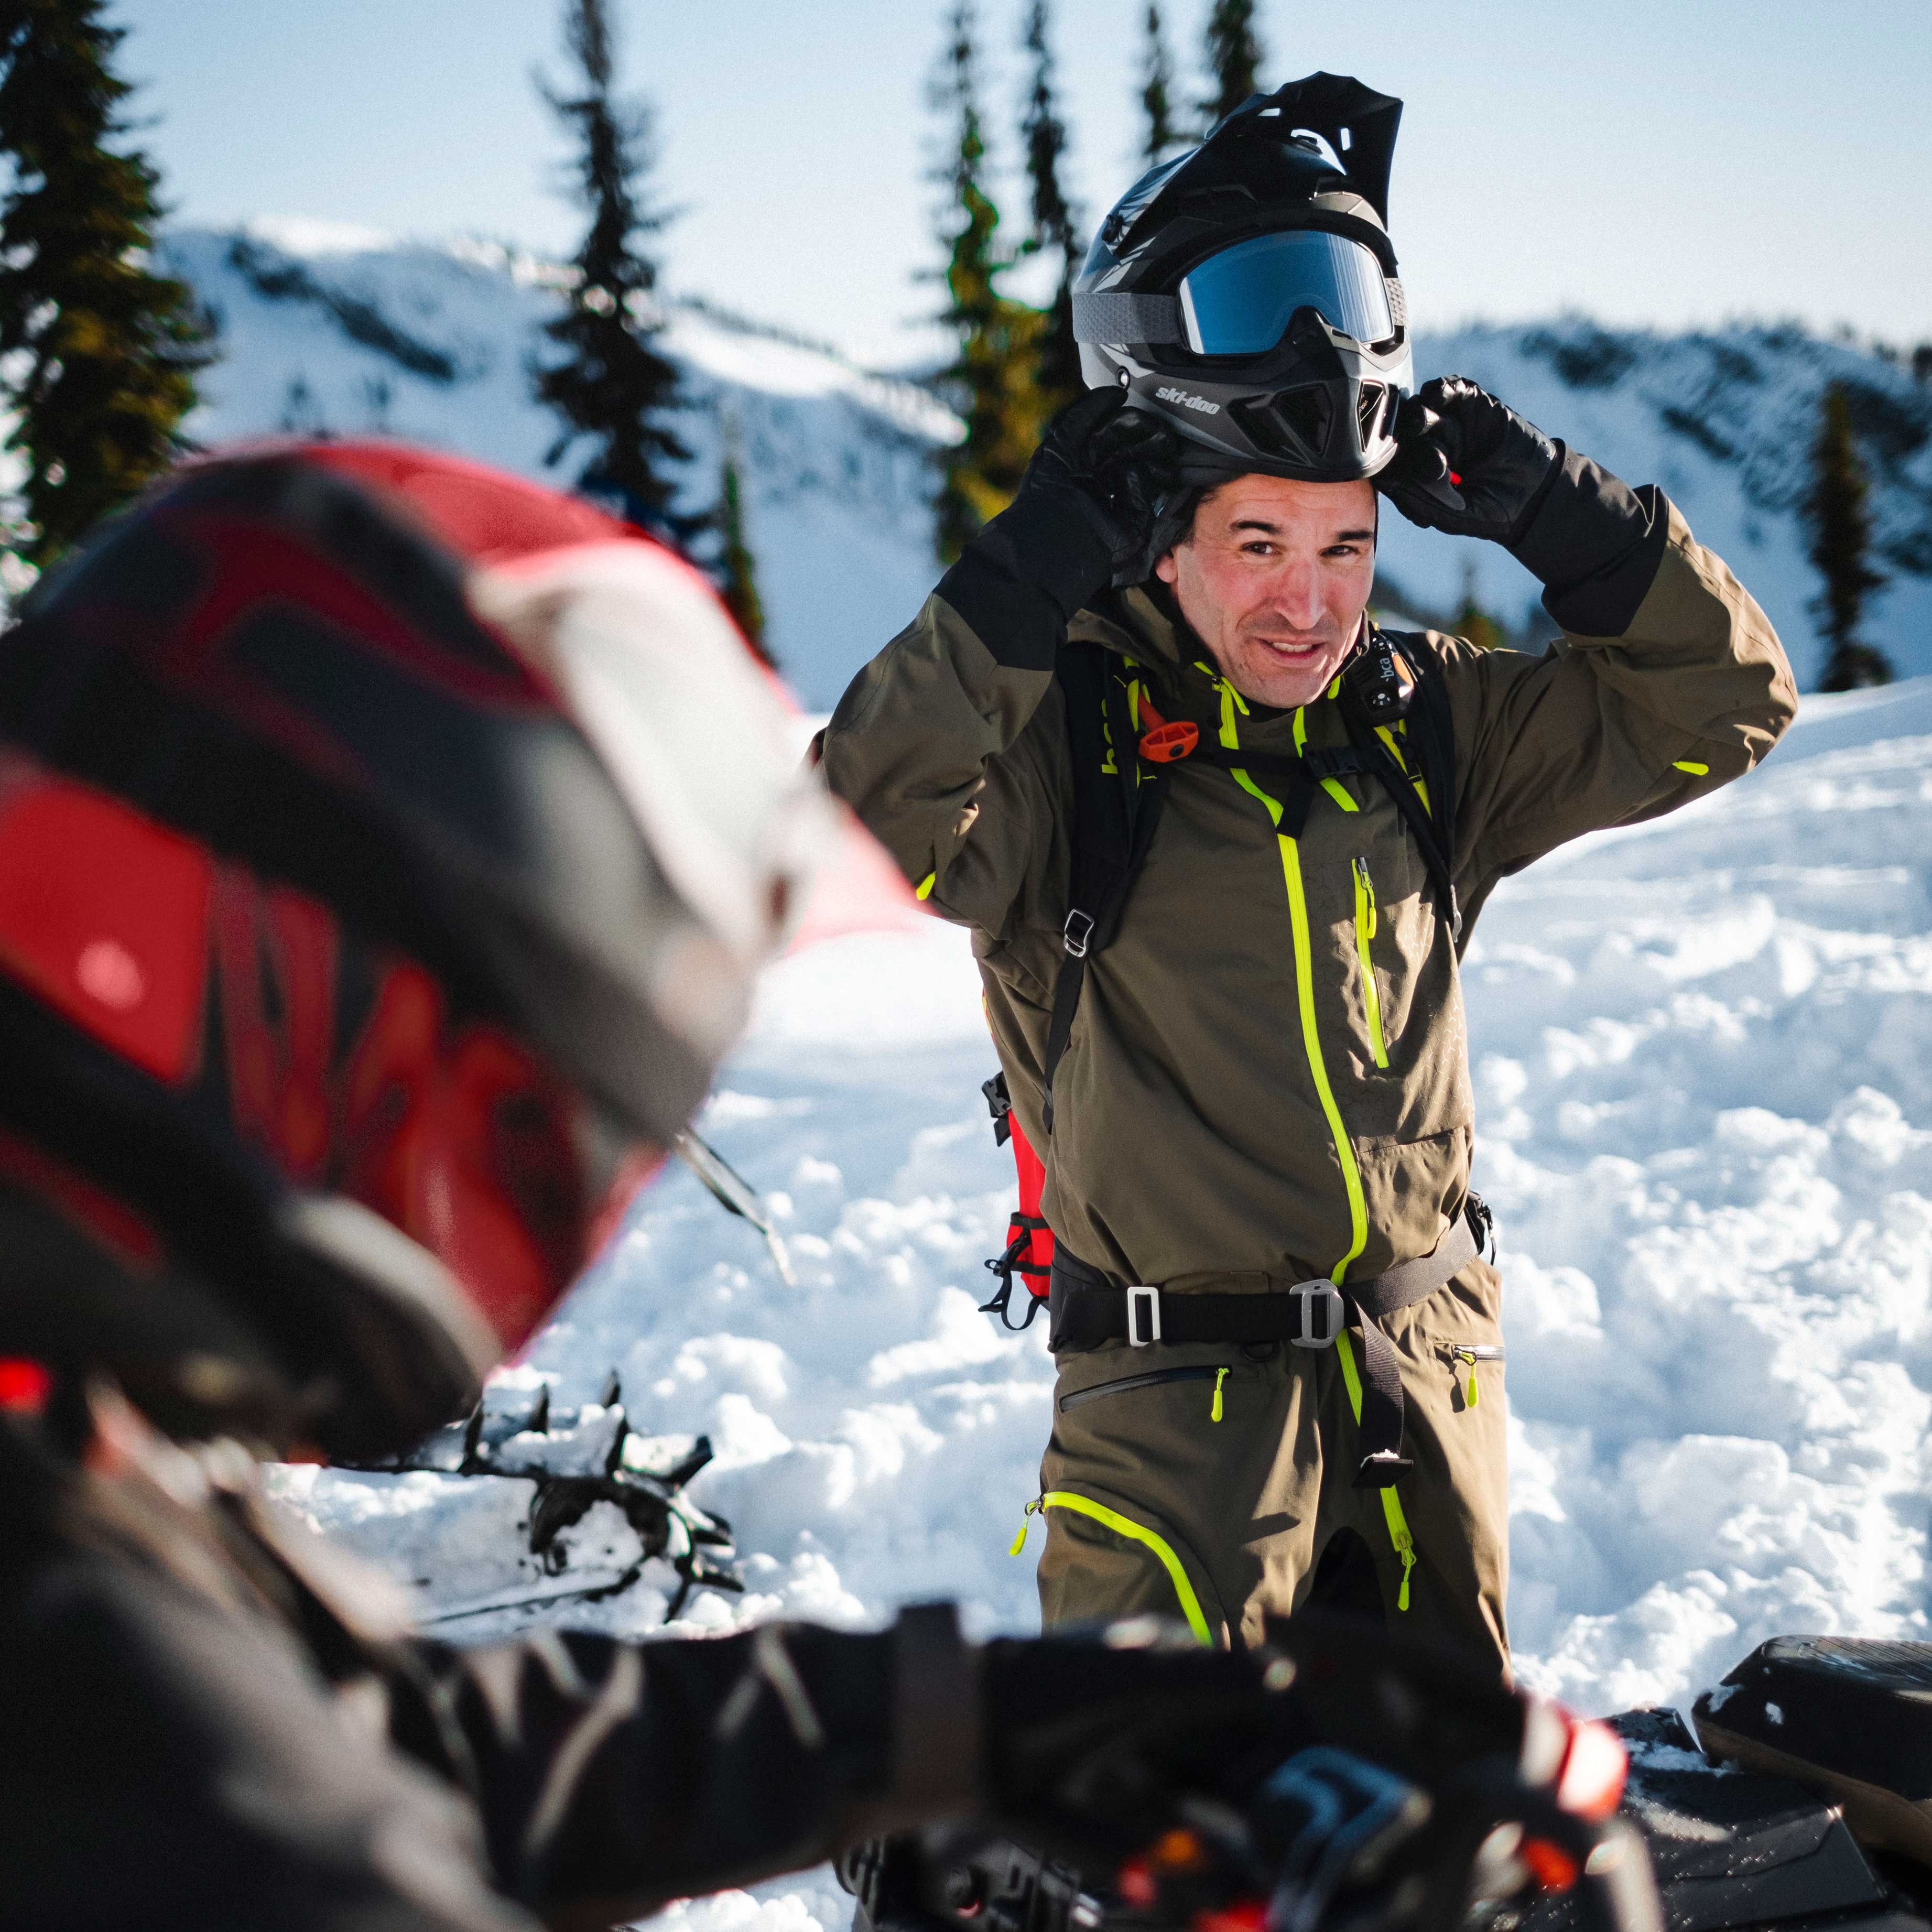 2 riders equipped with snowmobile Deep-Snow apparel